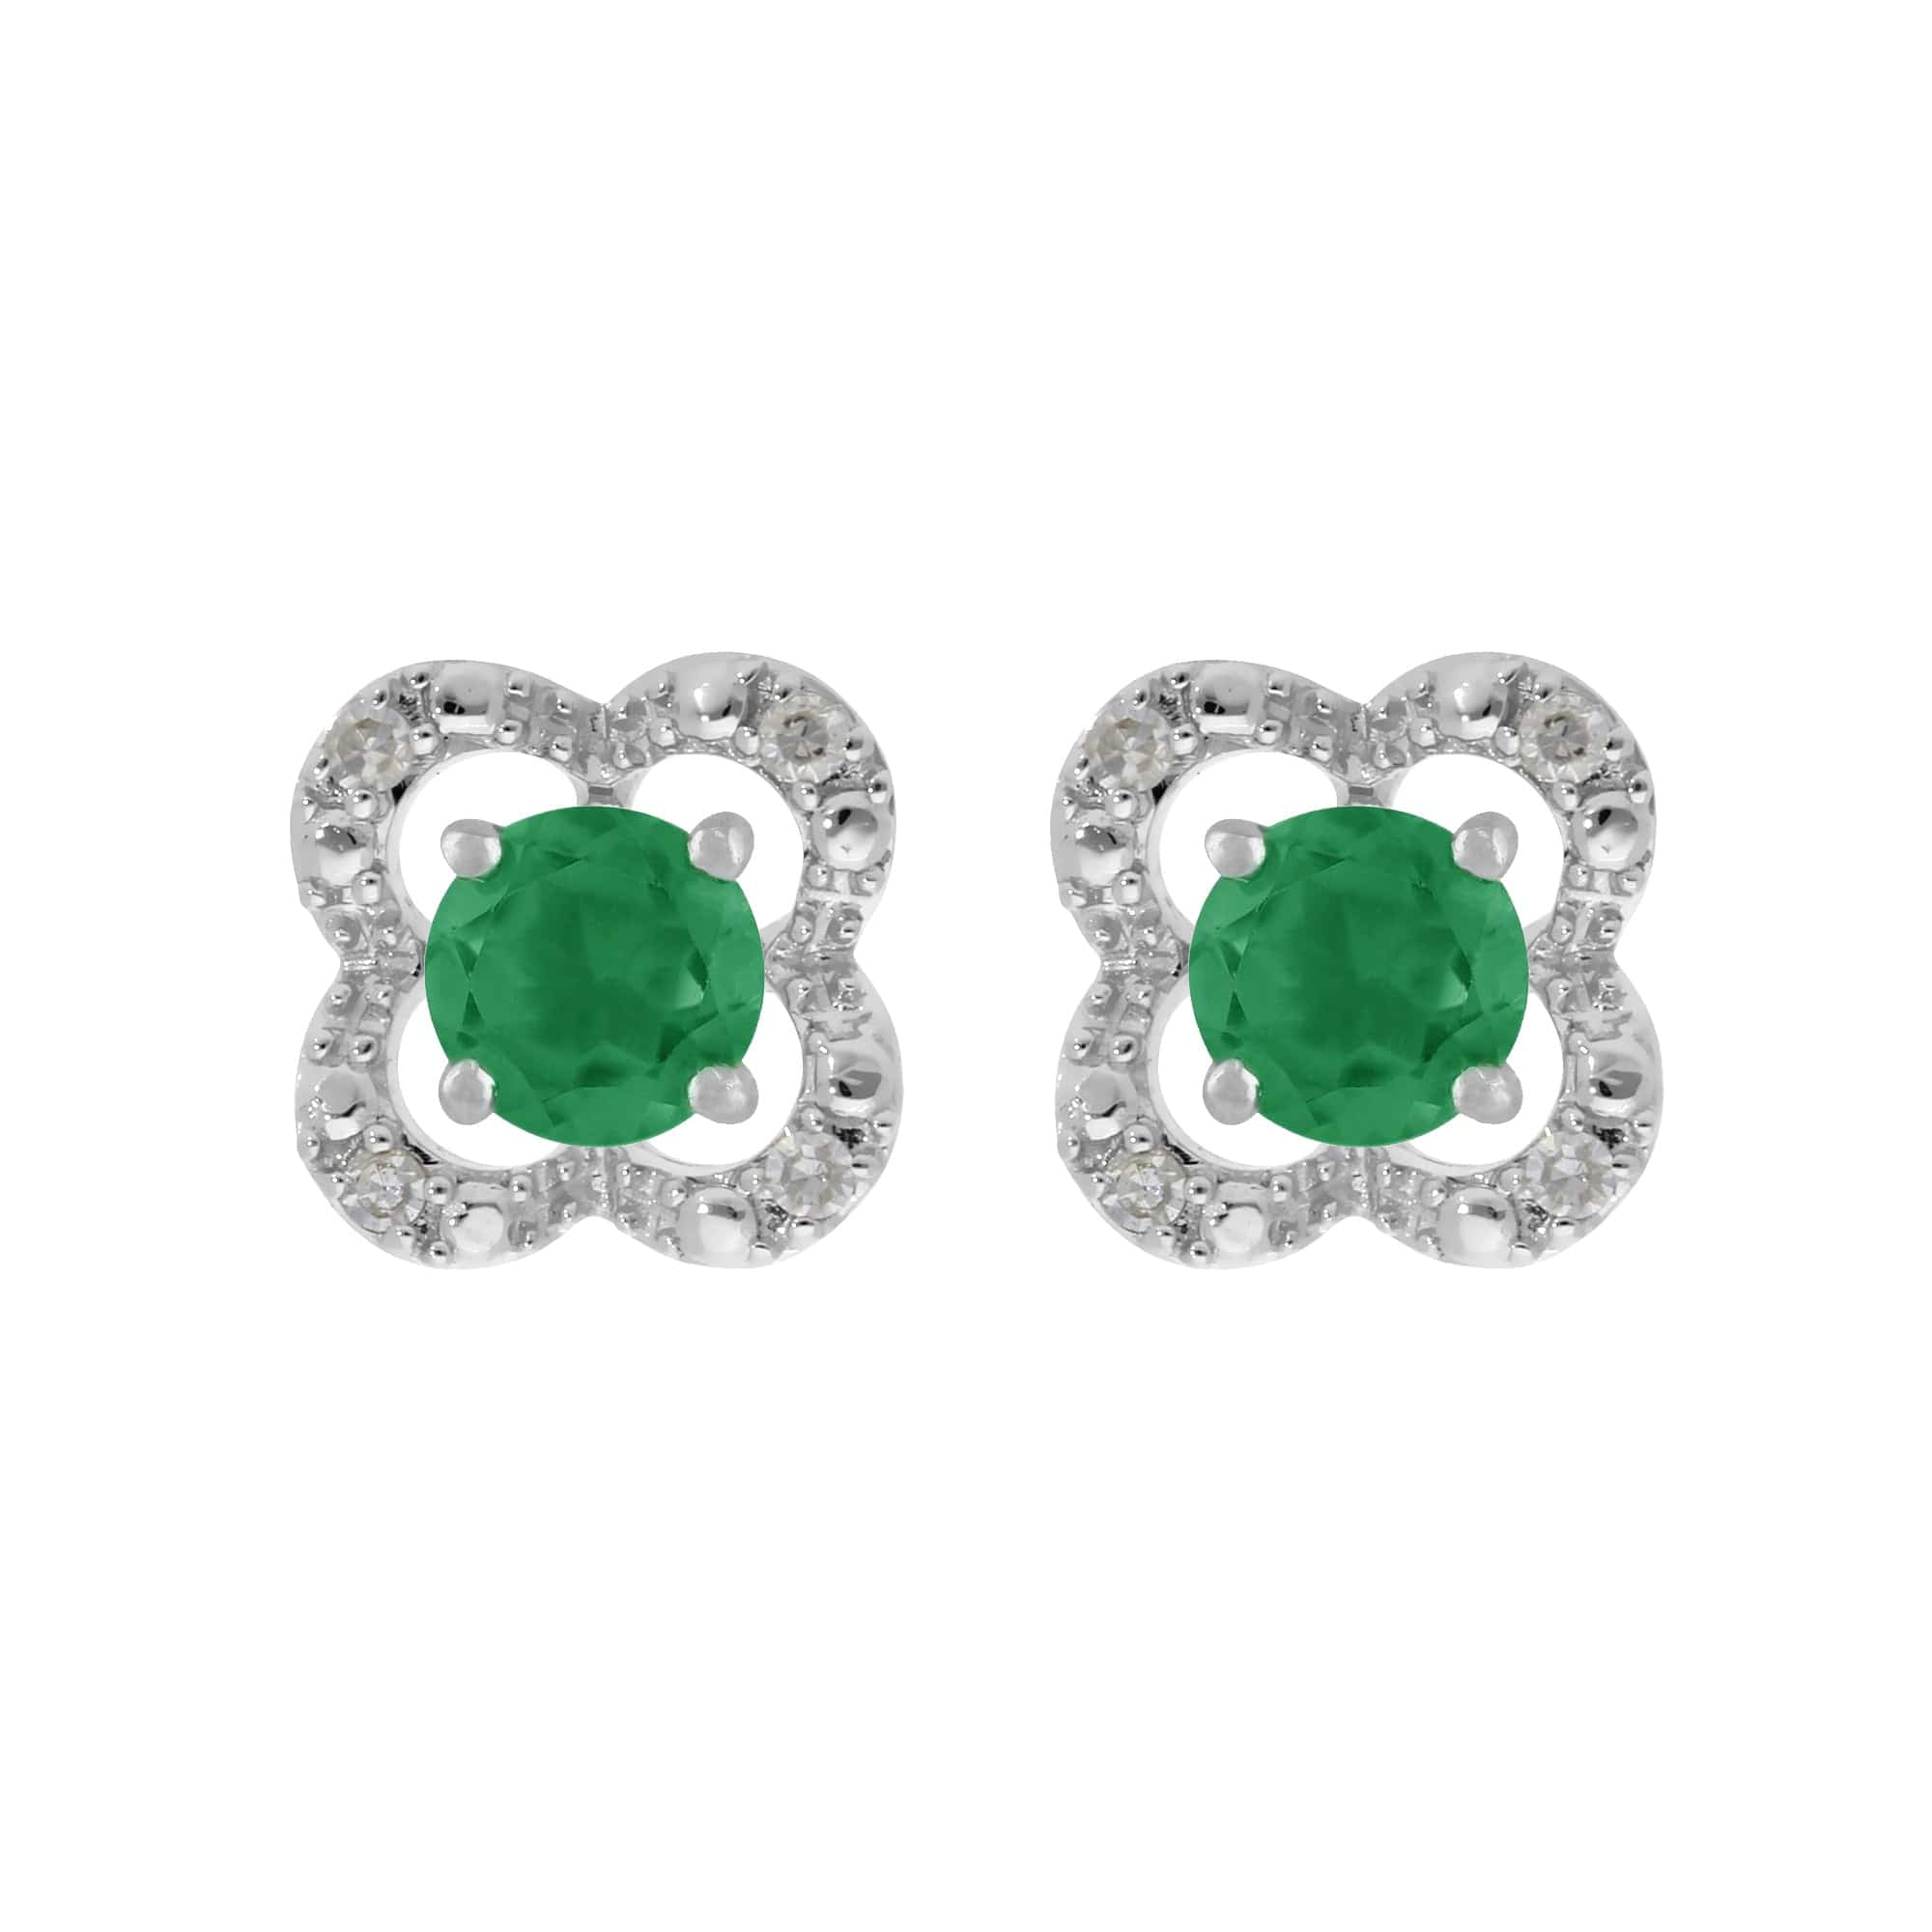 11621-162E0244019 Classic Round Emerald Stud Earrings with Detachable Diamond Flower Ear Jacket in 9ct White Gold 1